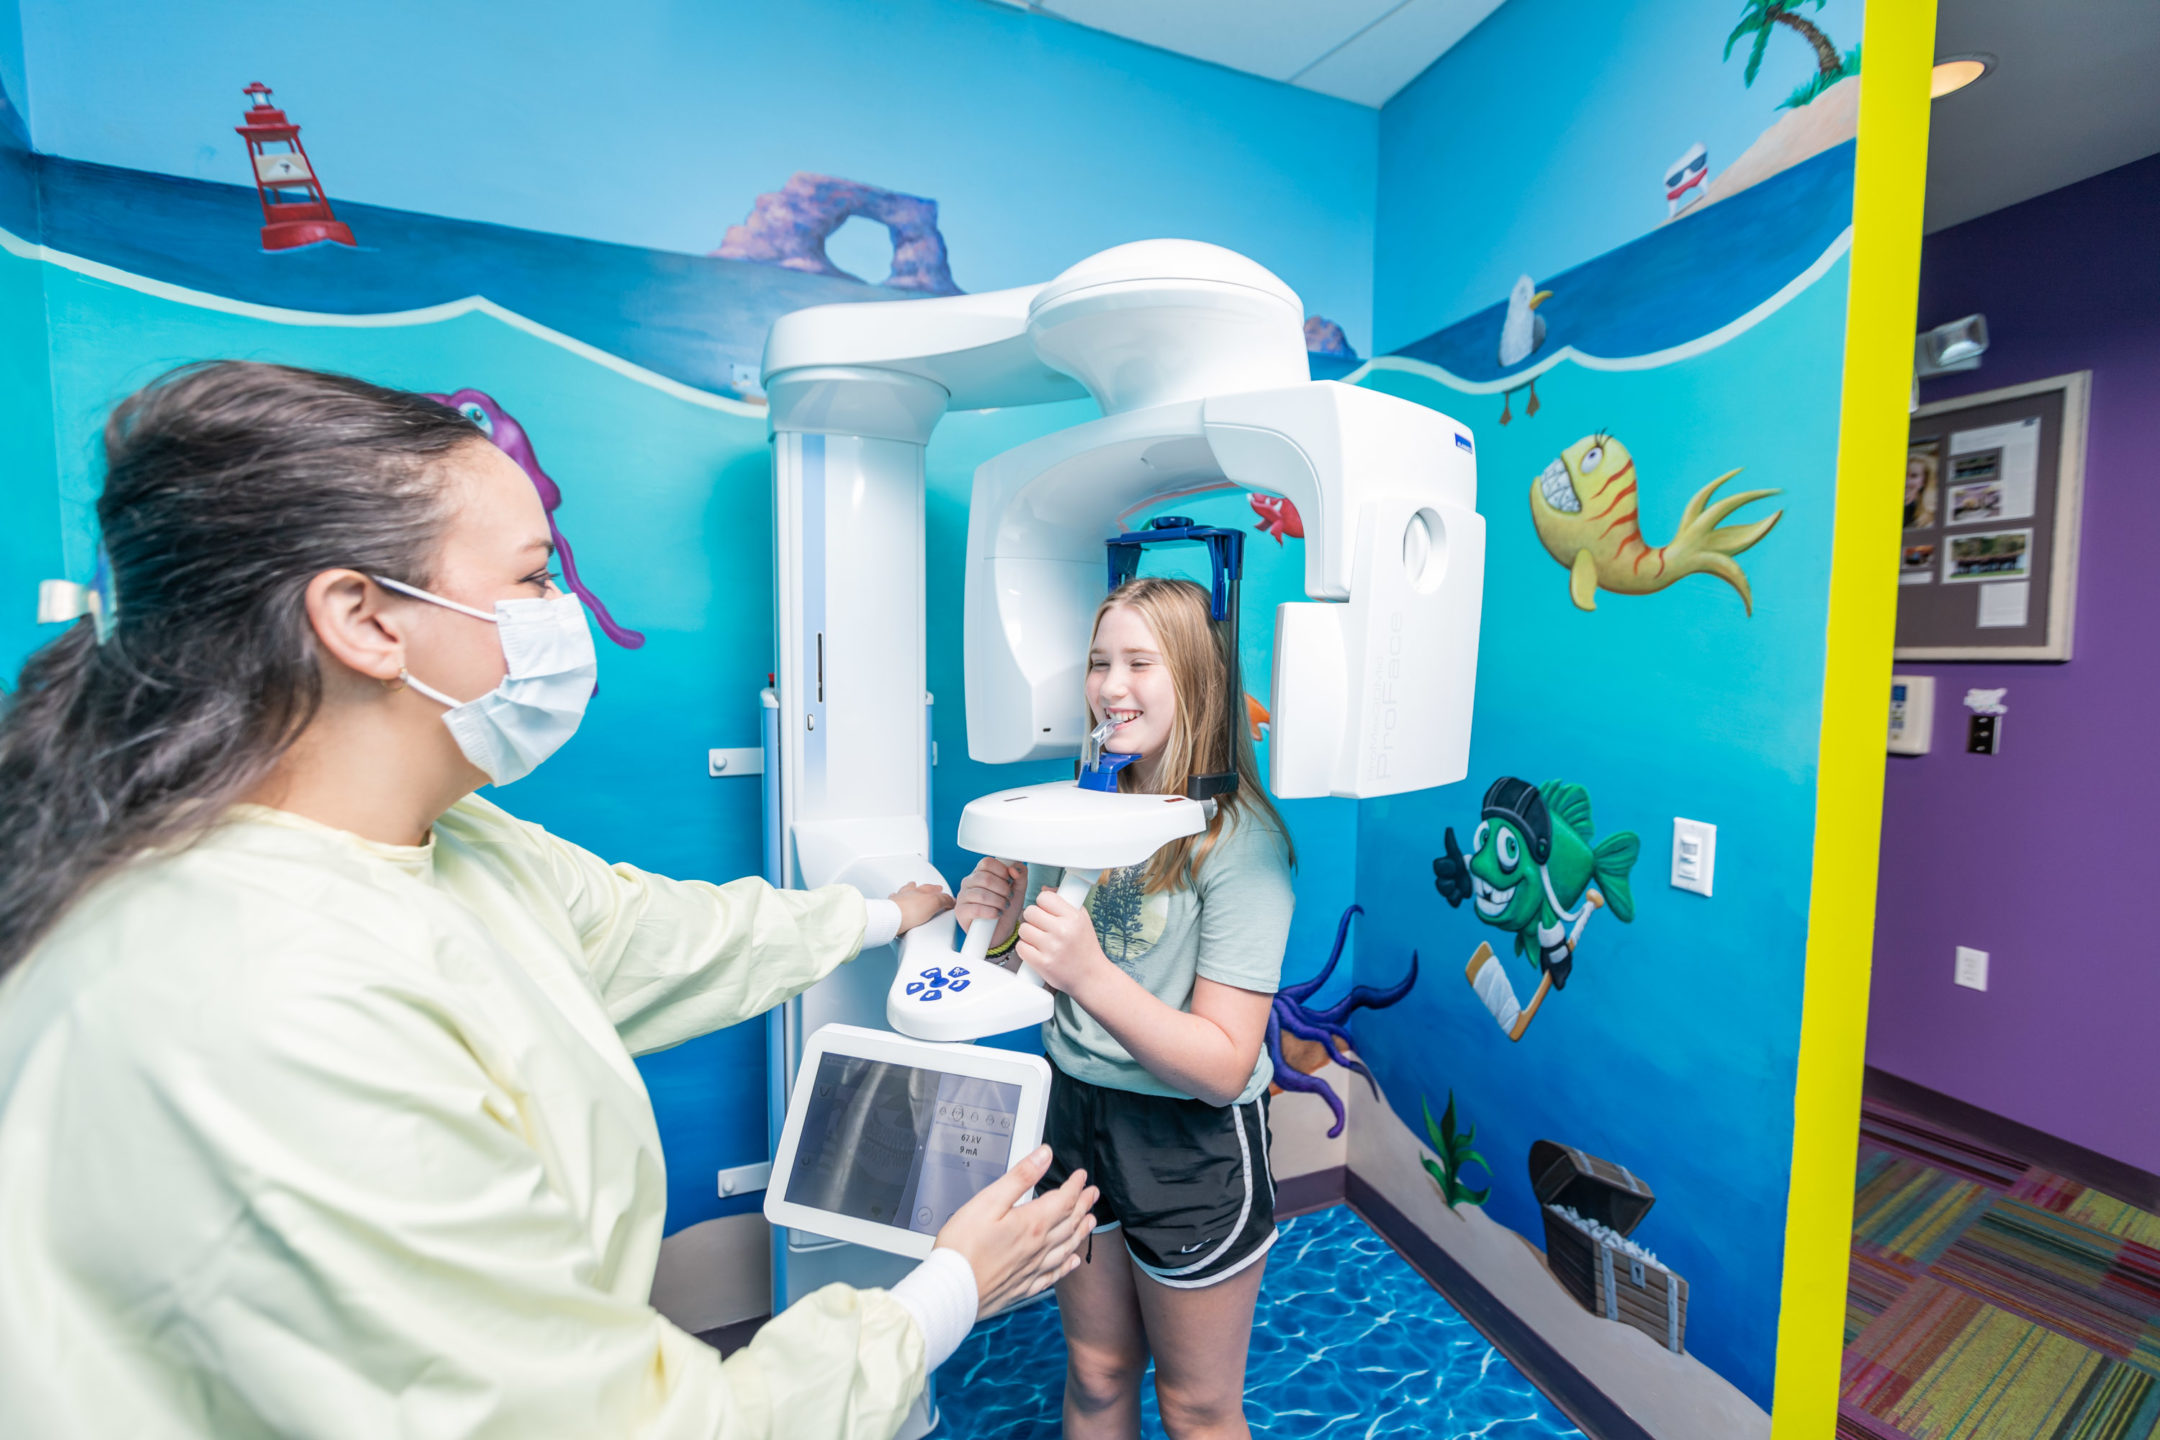 Young girl receives 3D x-ray imaging in fun, decorated room while technician provides instructions